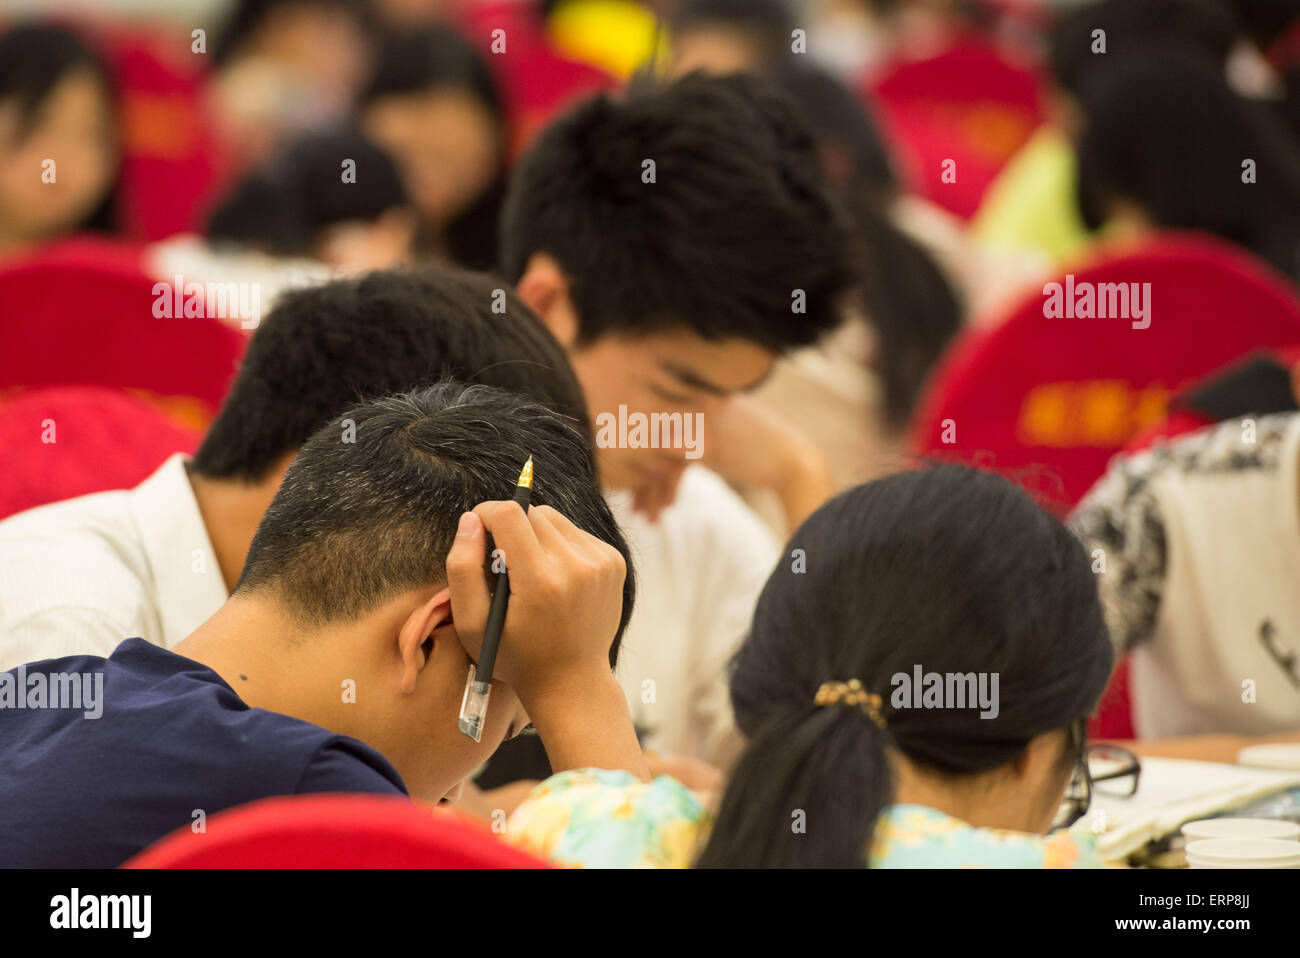 (150606) -- CHONGQING, June 6, 2015 (Xinhua) -- Students prepare for the coming national college entrance exams at the hall of a hotel in Bishan District of Chongqing, southwest China, June 6, 2015, one day before the exams.  About 1300 students of Laifeng High School would attend the exam in Bishan District, a site 20 kilometers away from their school, on June 7 and 8, therefore, most of the students booked hotels near the exam site and prepared for the exam at the last night. (Xinhua/Liu Chan) (zkr) Stock Photo